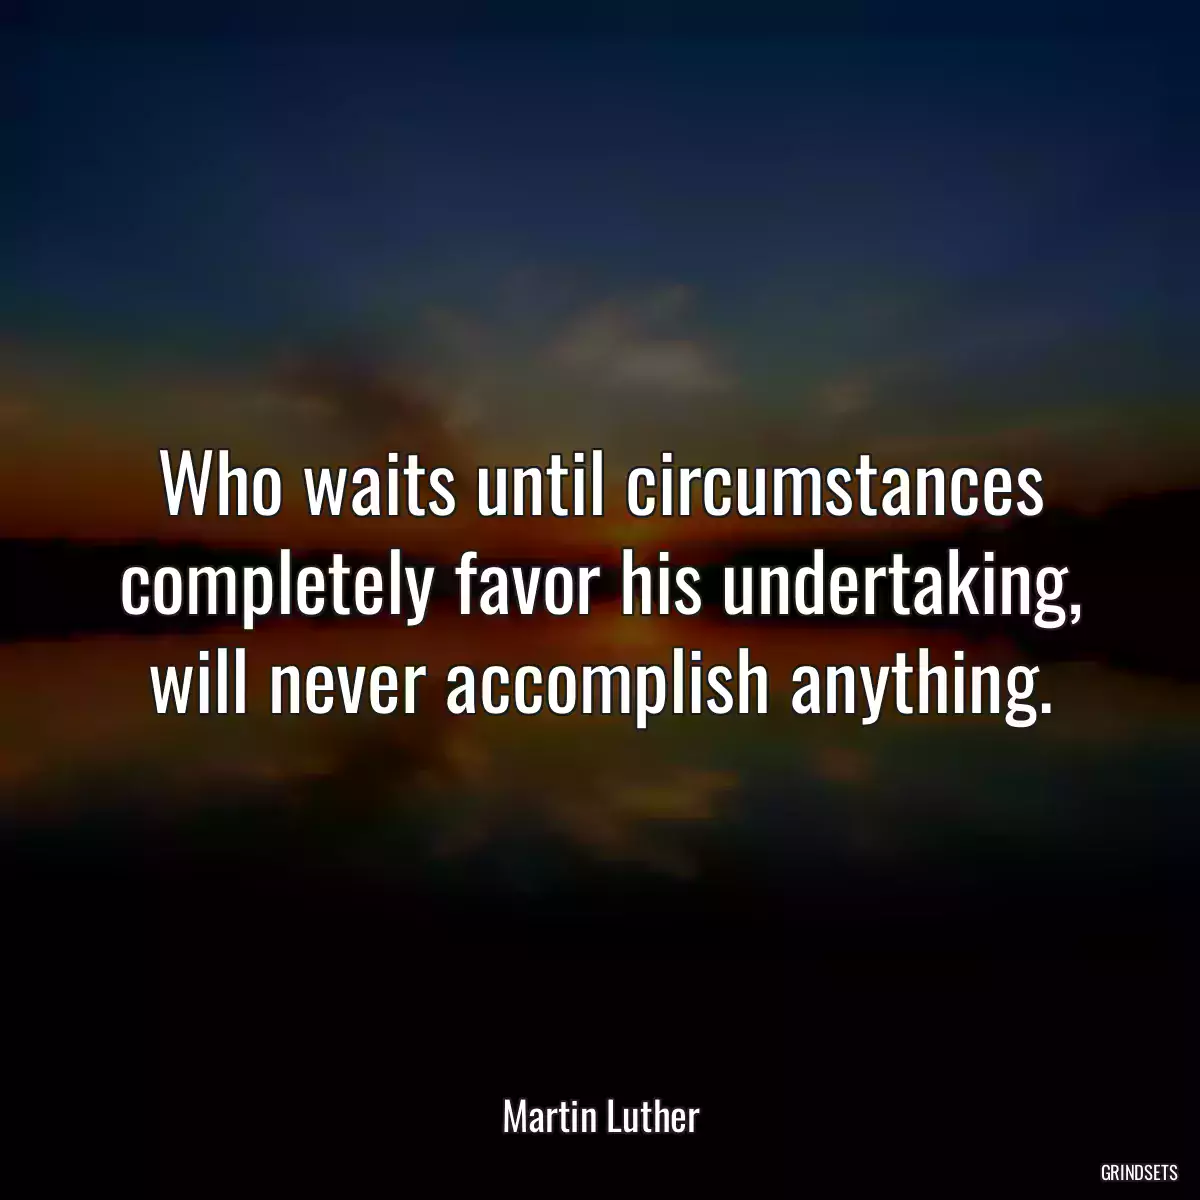 Who waits until circumstances completely favor his undertaking, will never accomplish anything.